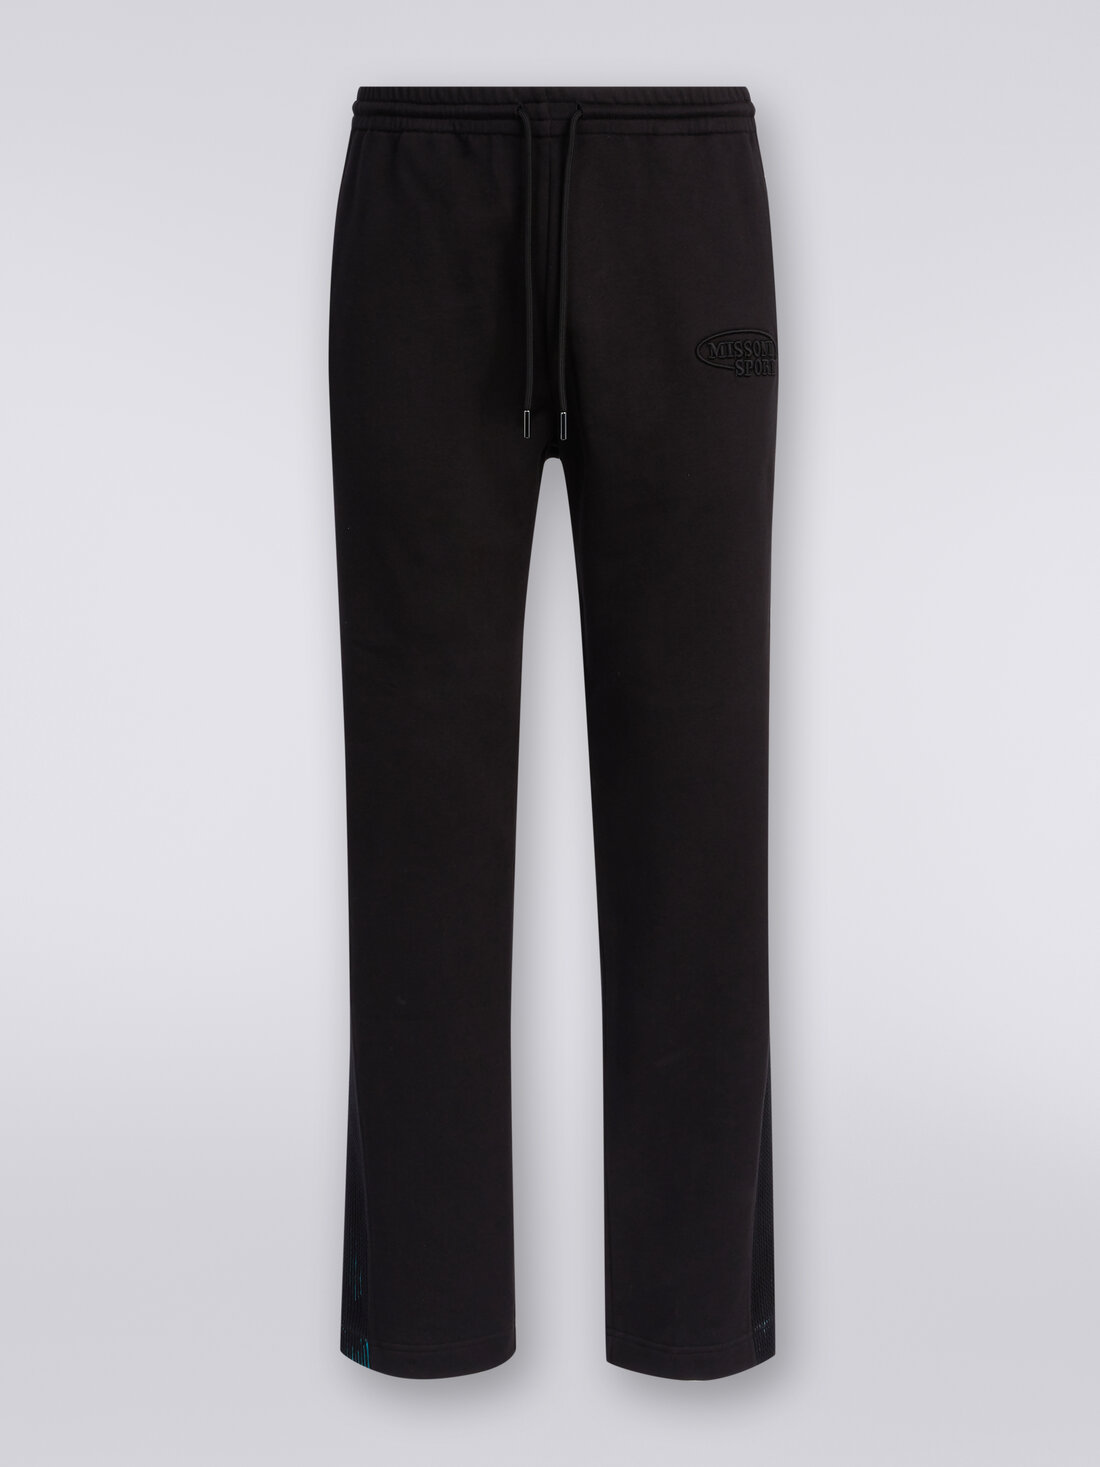 Trousers in fleece with logo and knitted side bands, Black    - TS24SI03BJ00INS91J4 - 0